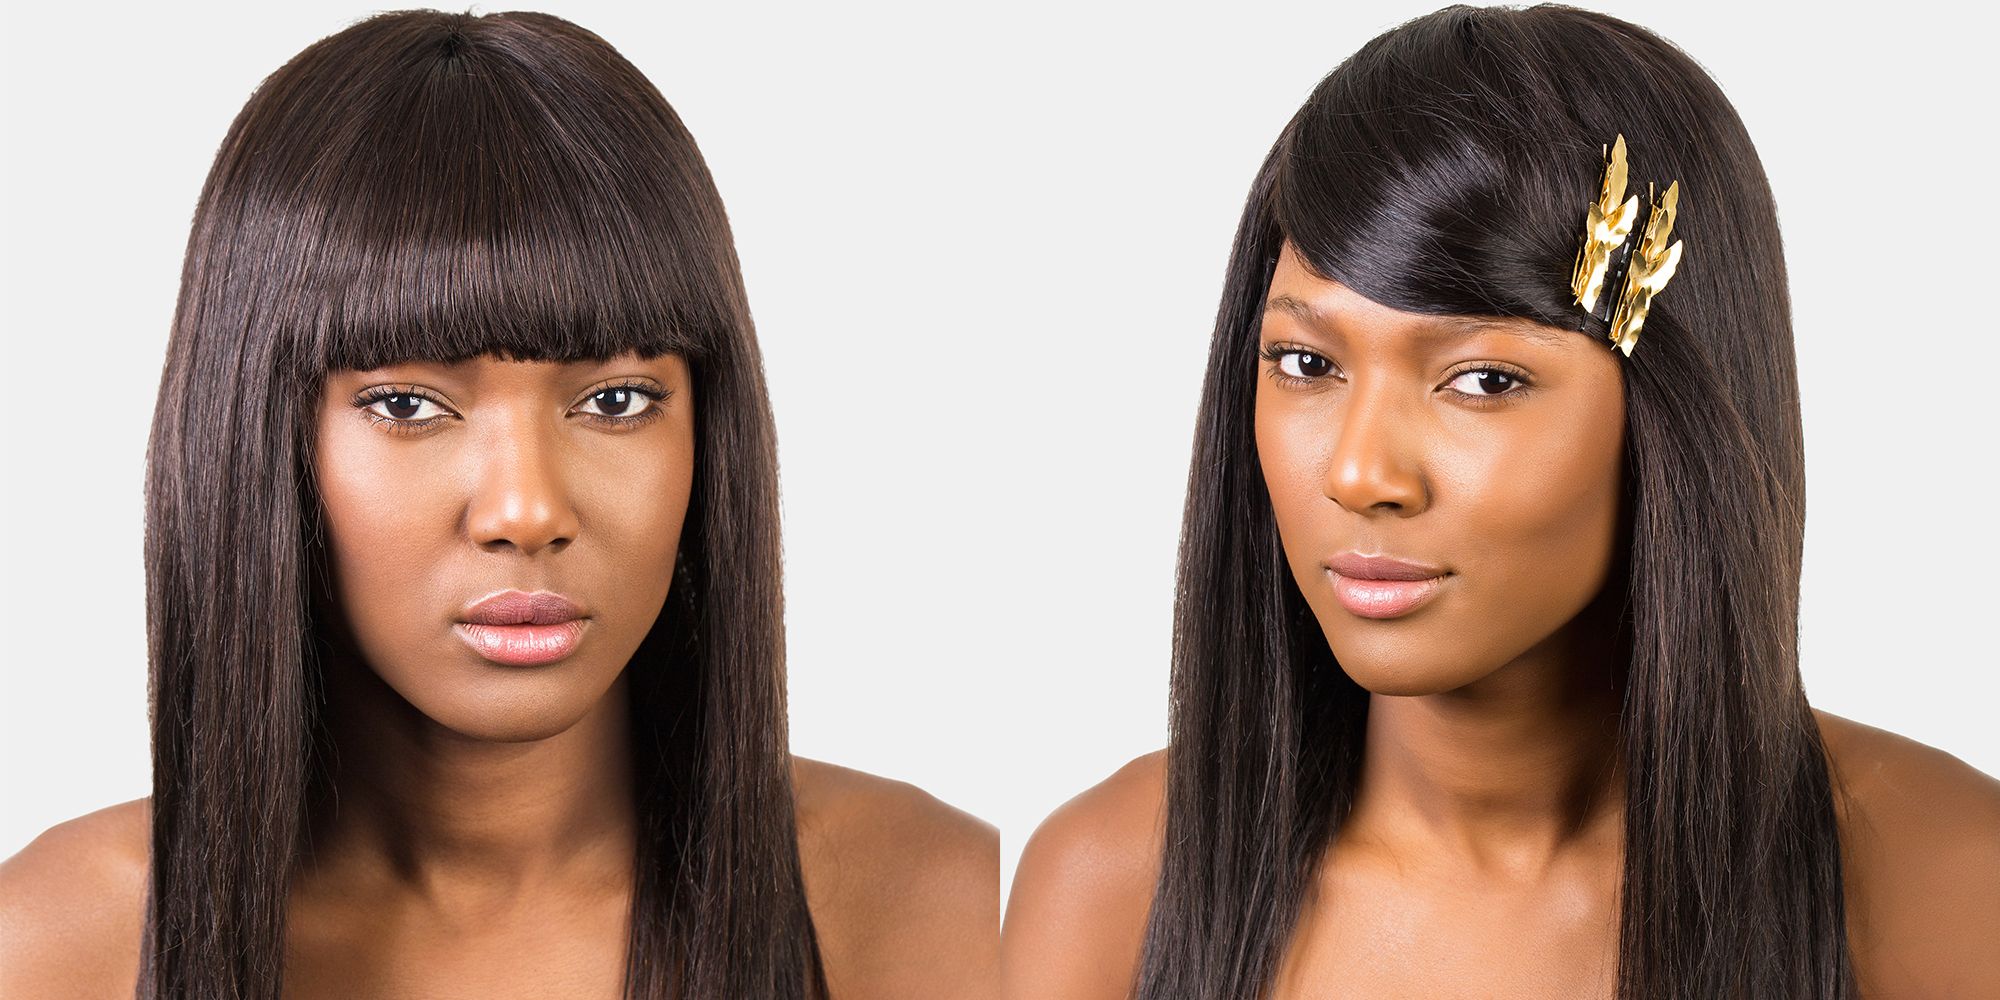 What are easy hairstyles with bangs for long hair? - Quora